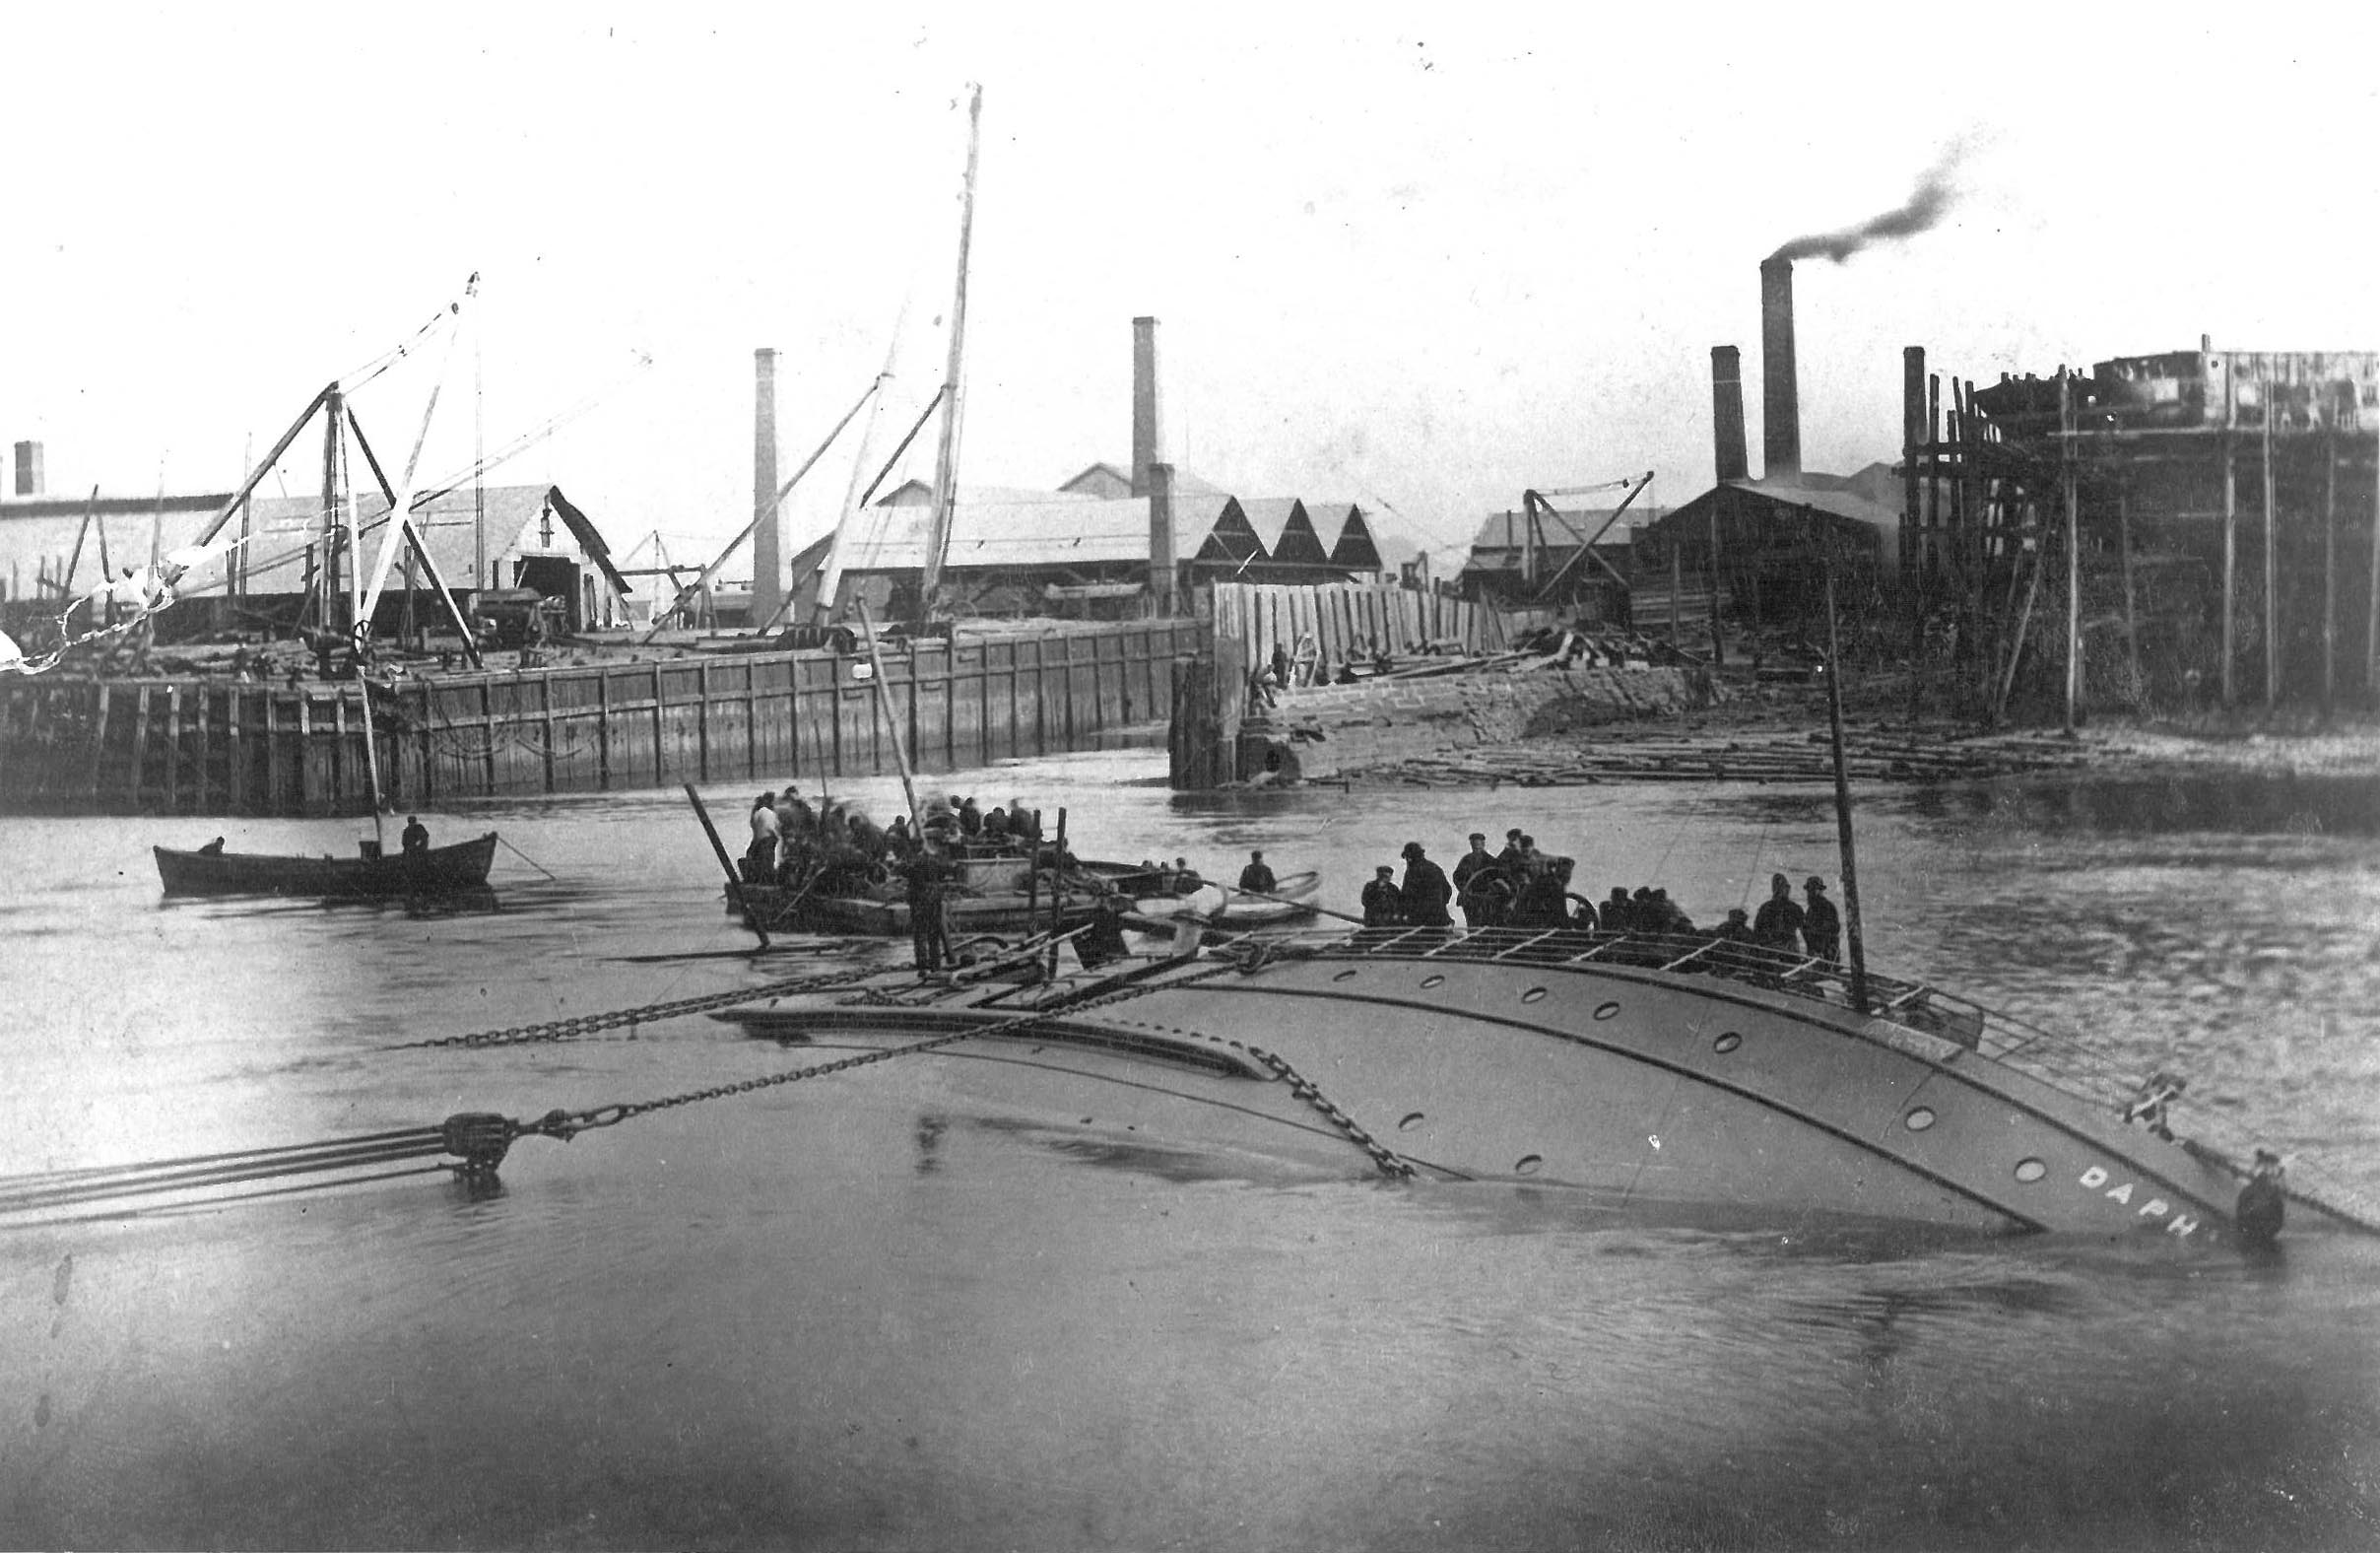 The side of a ship lies in the water with Daphne written towards the bow. Rescuers surround it. In the background is a shipyard